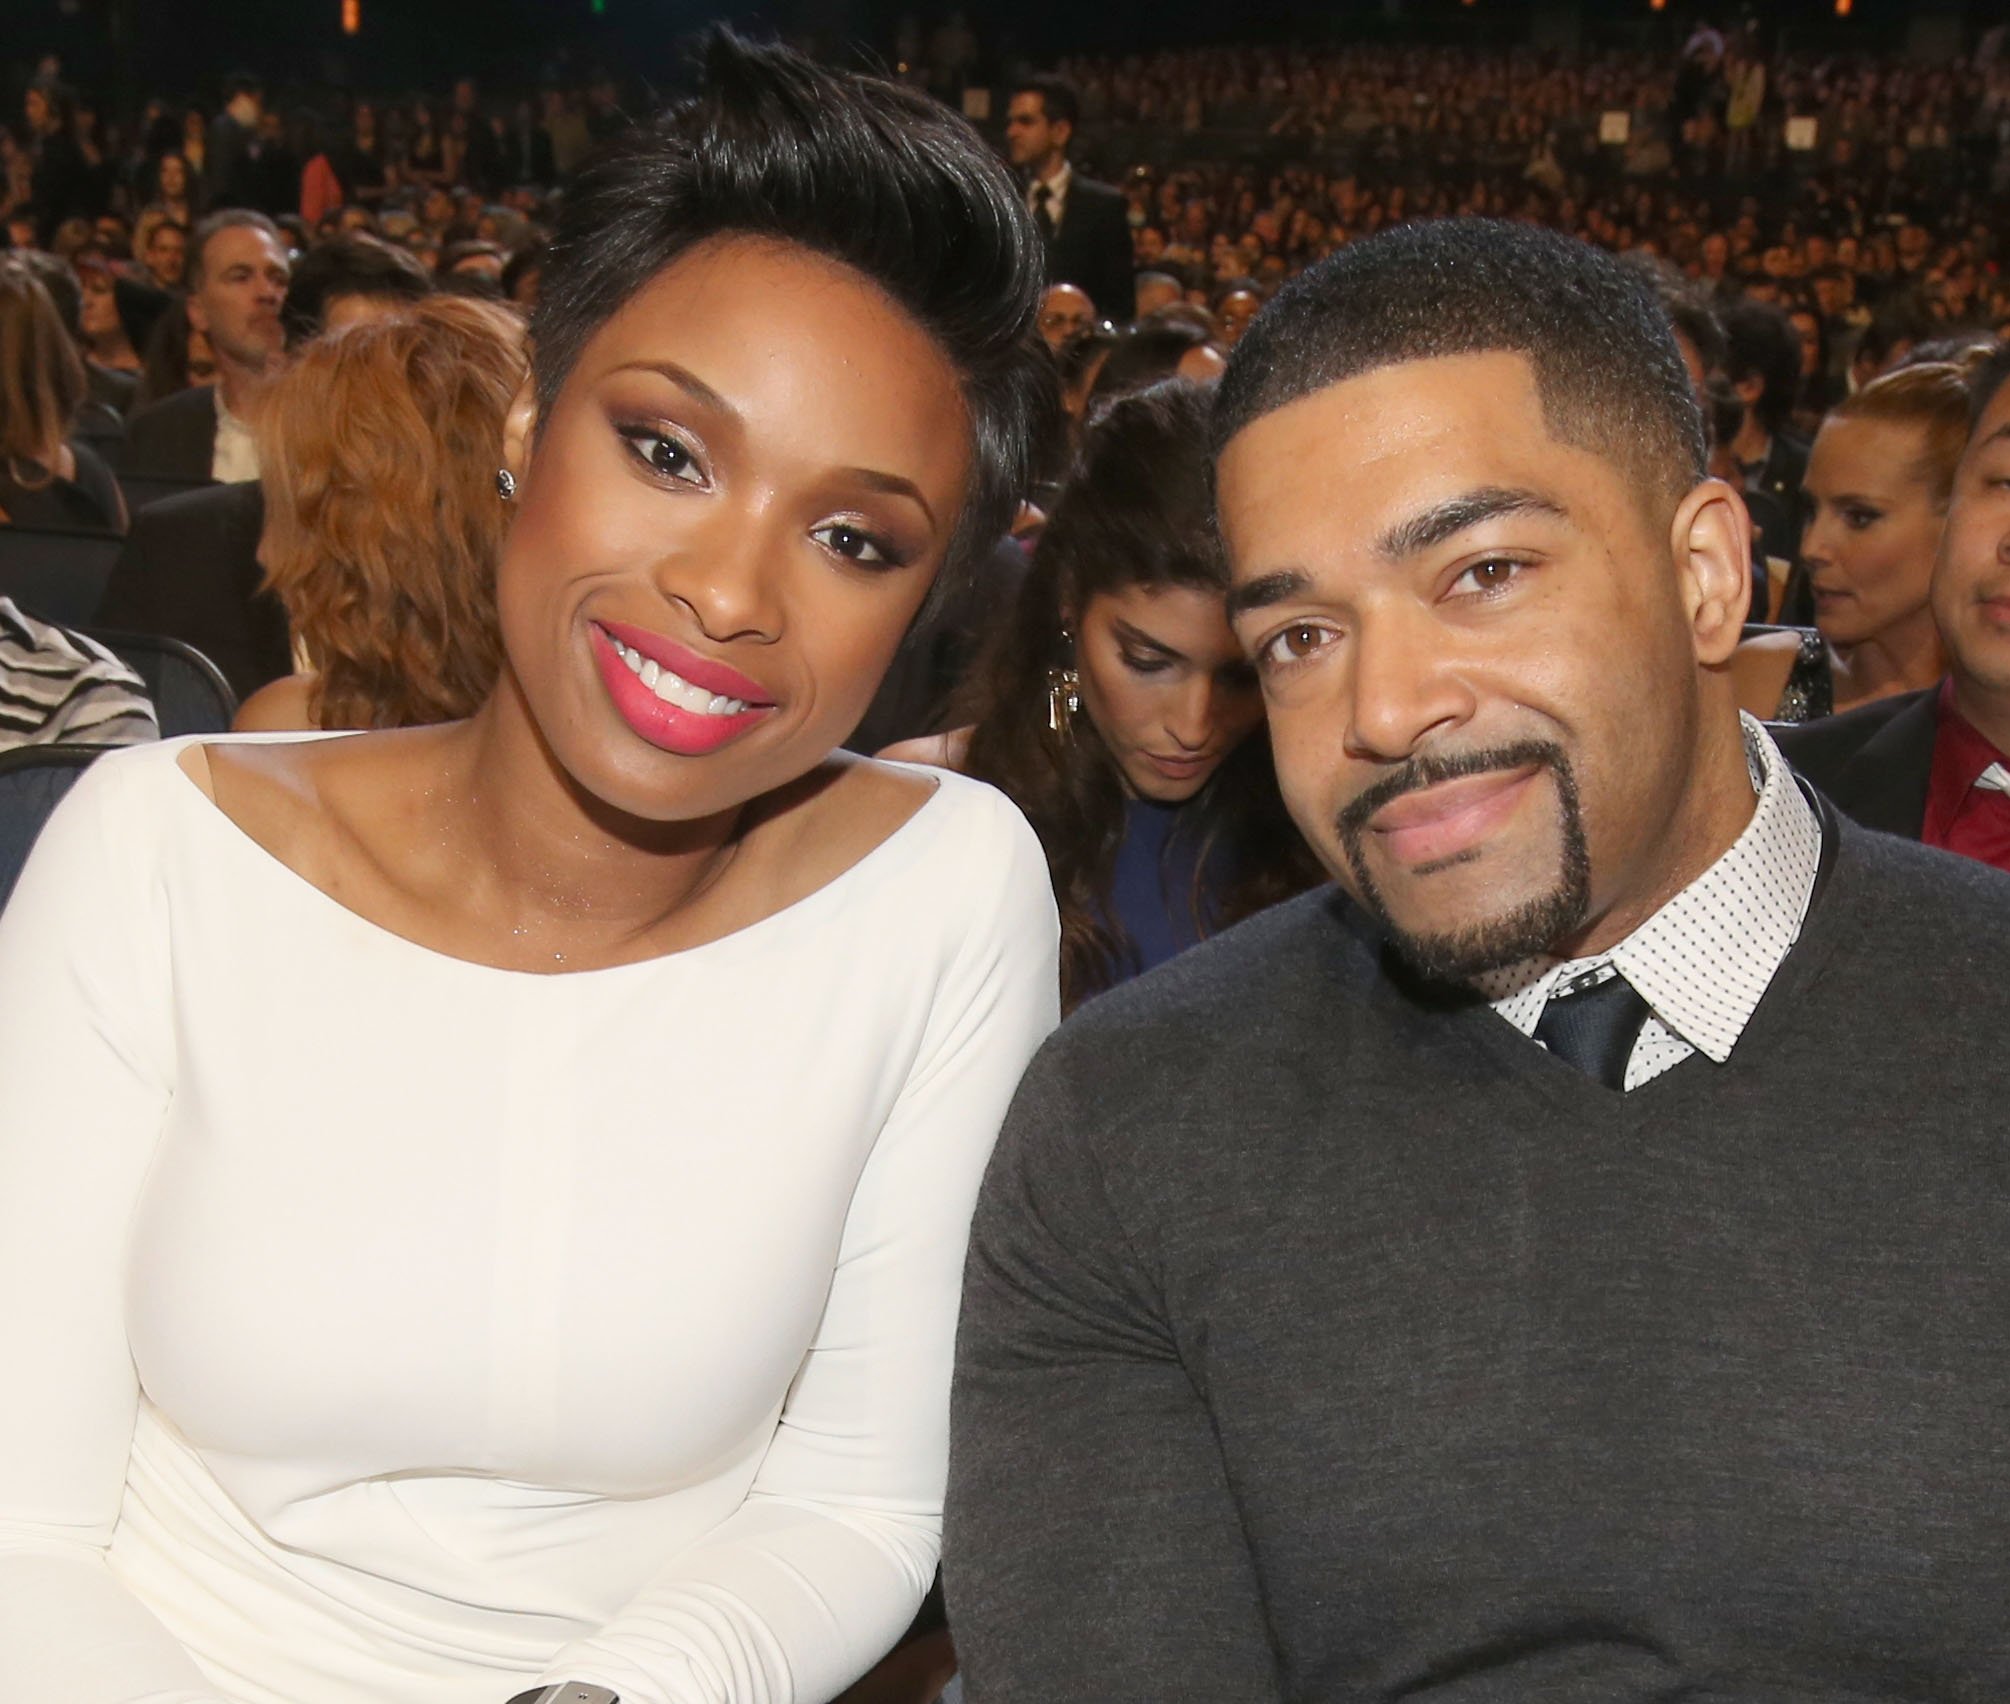 Jennifer Hudson and pro wrestler/actor David Otunga attend The 40th Annual People's Choice Awards at Nokia Theatre L.A. Live on January 8, 2014. | Photo: Getty Images